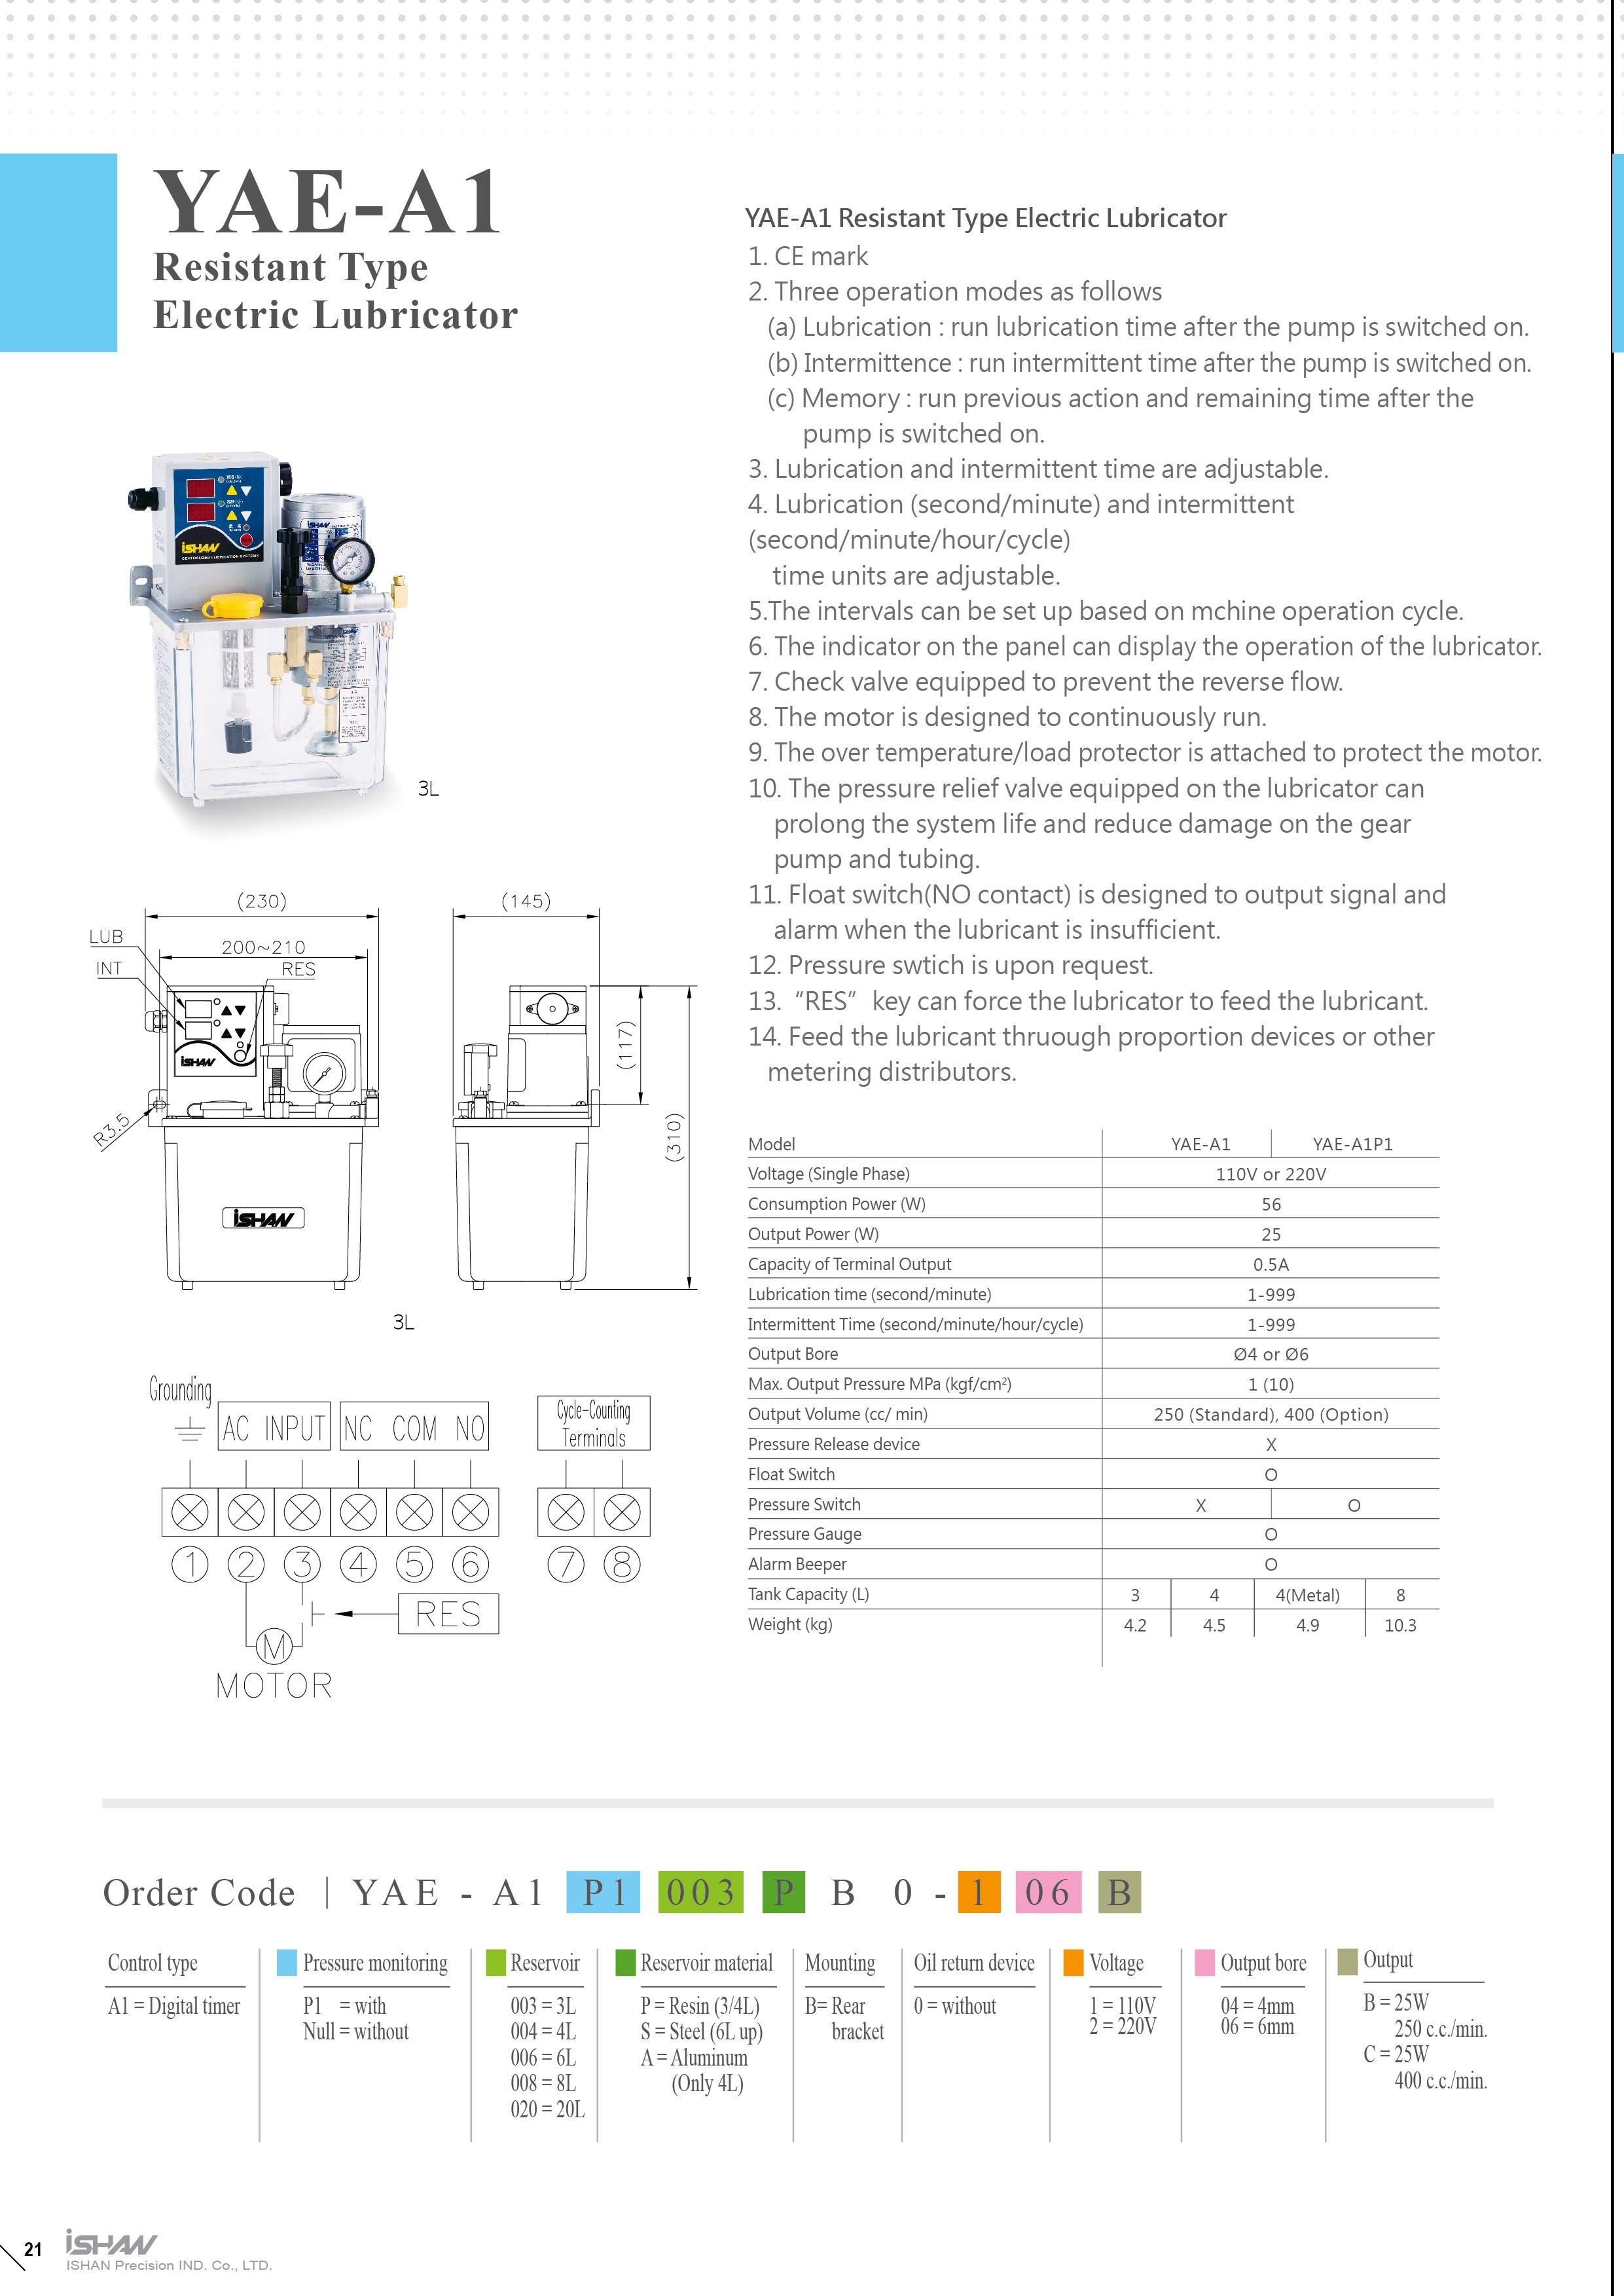 YAE-A1 Resistant Type Electric Lubricator